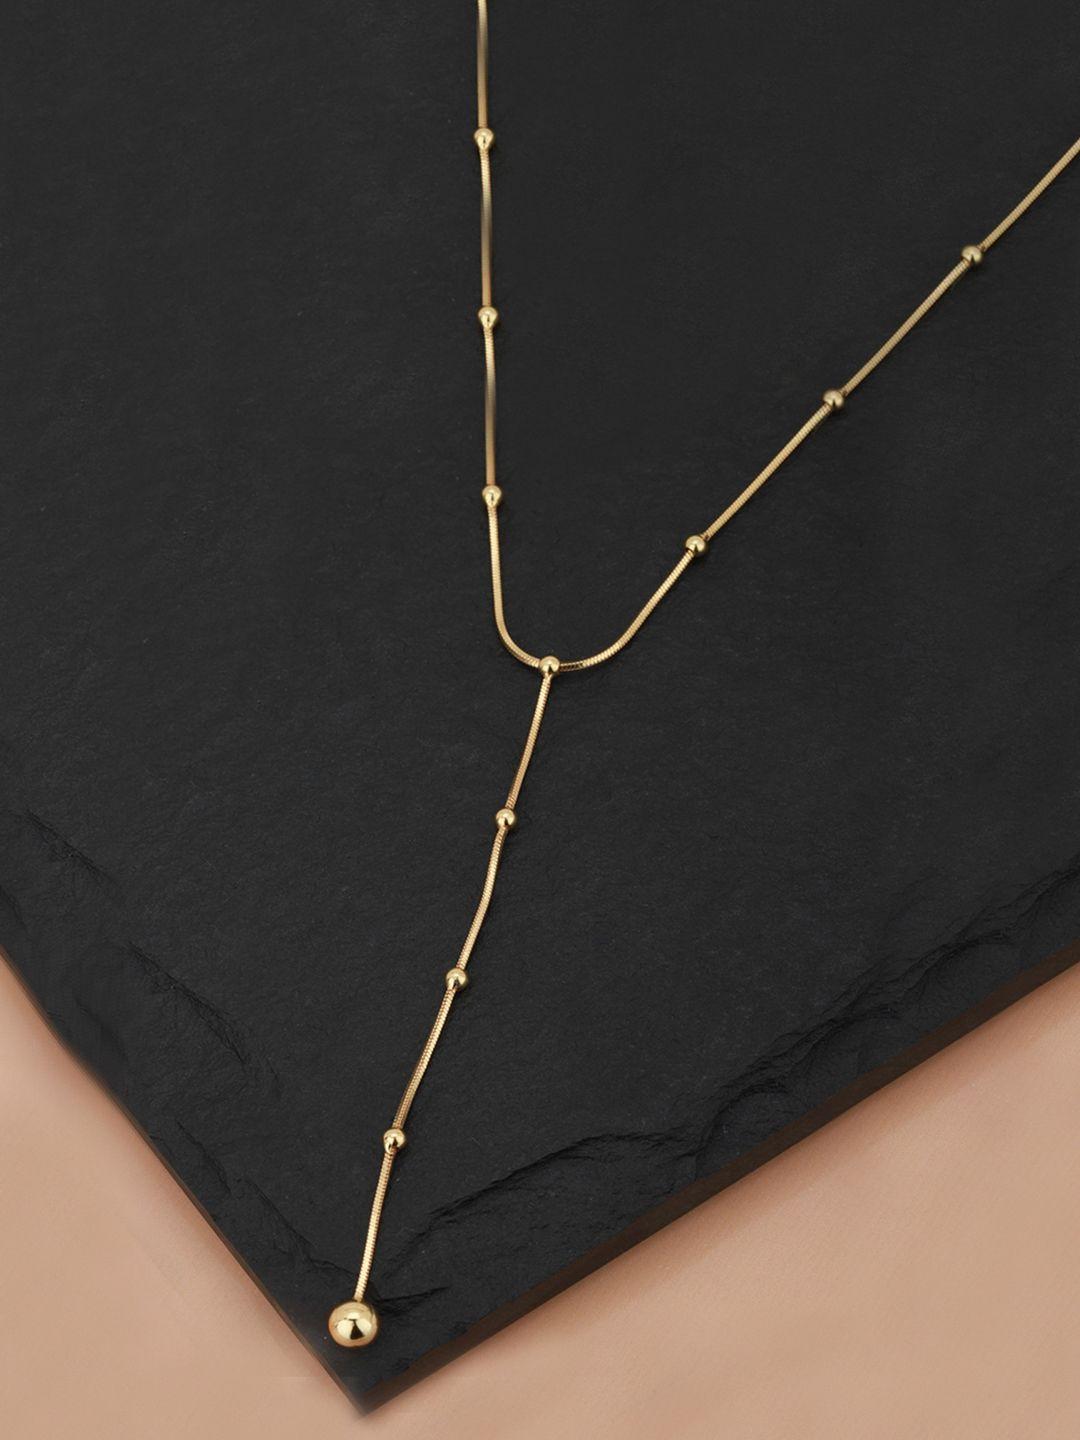 carlton london gold-plated lariat necklace